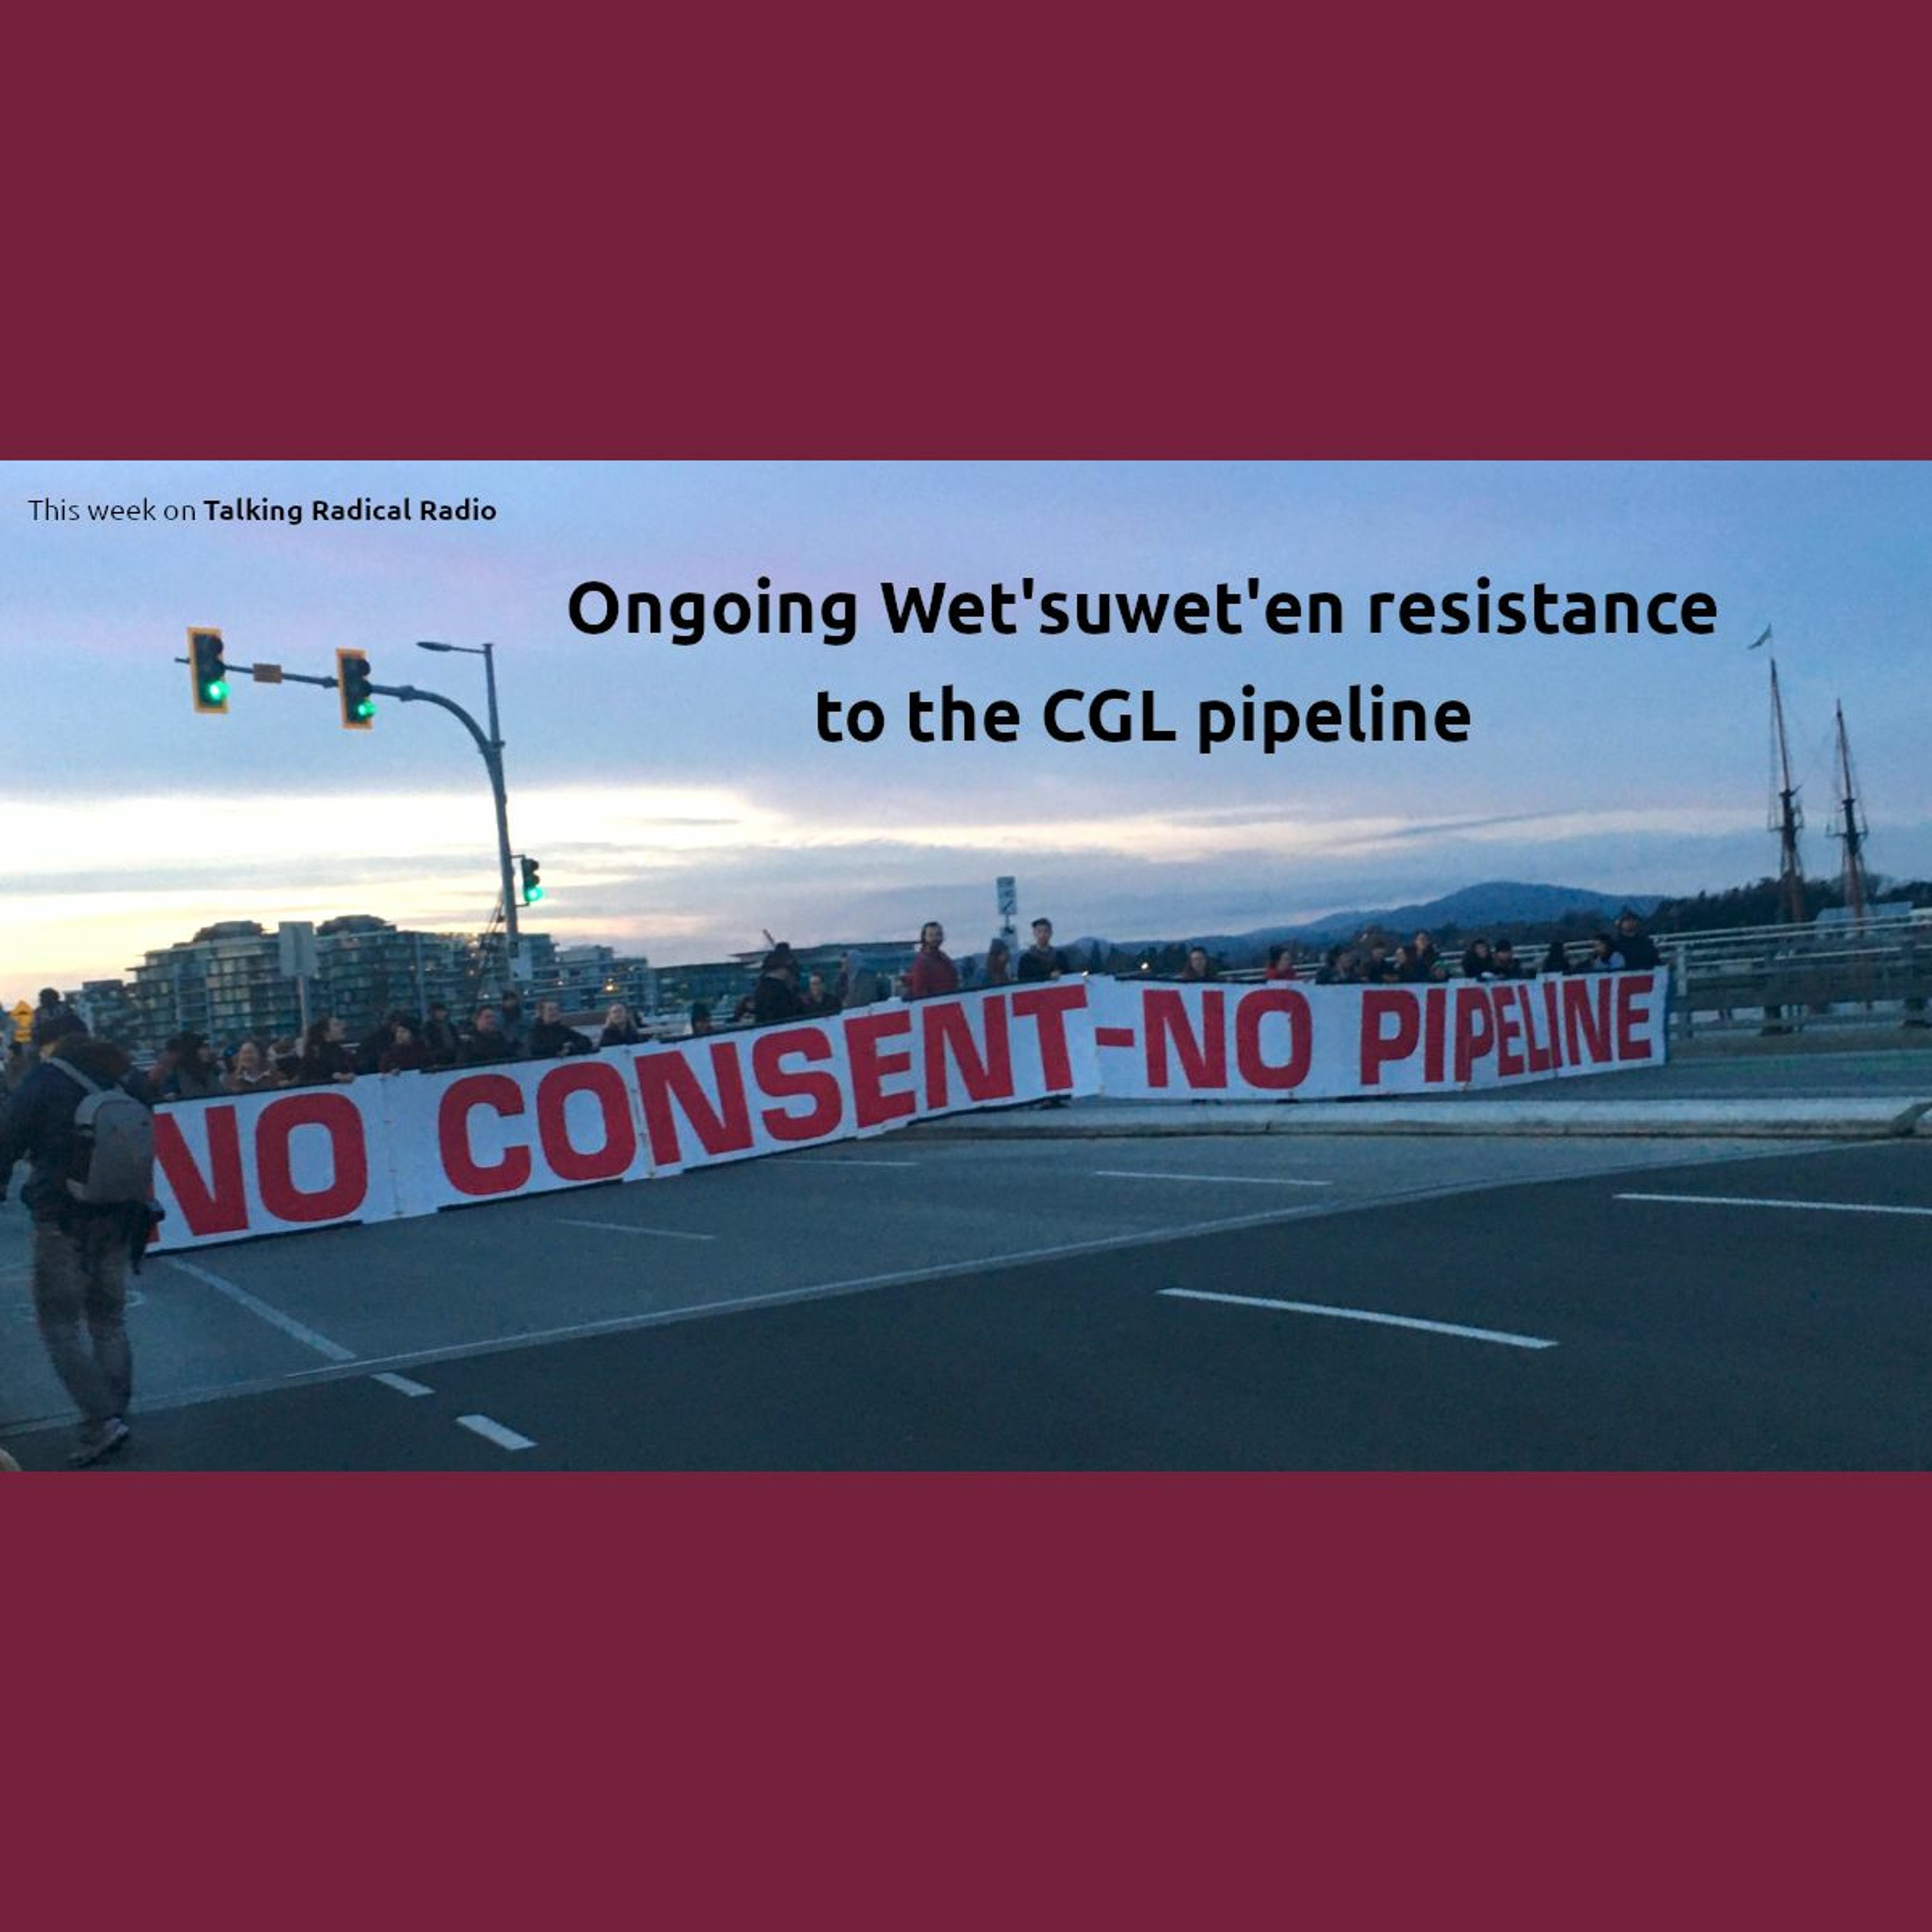 Ongoing Wet'suwet'en resistance to the CGL pipeline